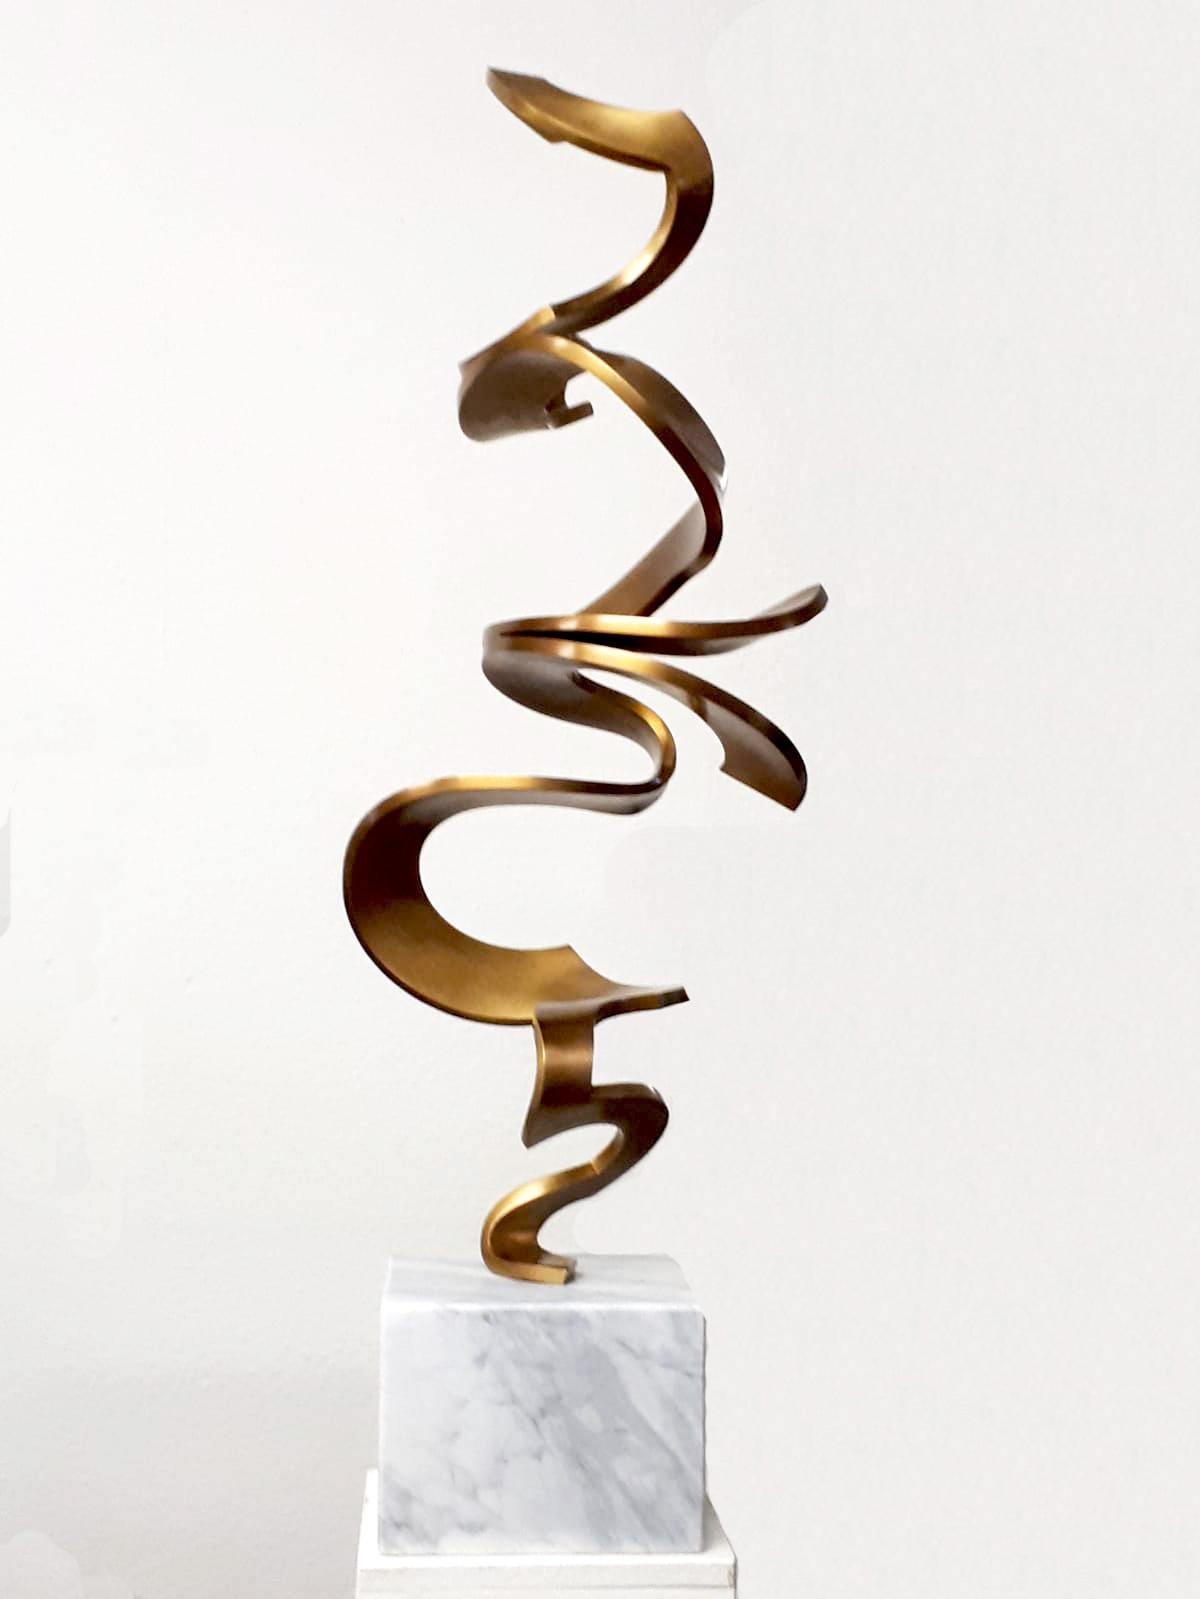 Artist: Kuno Vollet

Title: Schwerelos Gold

Materials: Bronze sculpture with a dark patina on black granite base or white marble

Size: 65cm height of upper sculpture, base: 18 x 18 cm x 8 cm 

Limited Edition of 15
